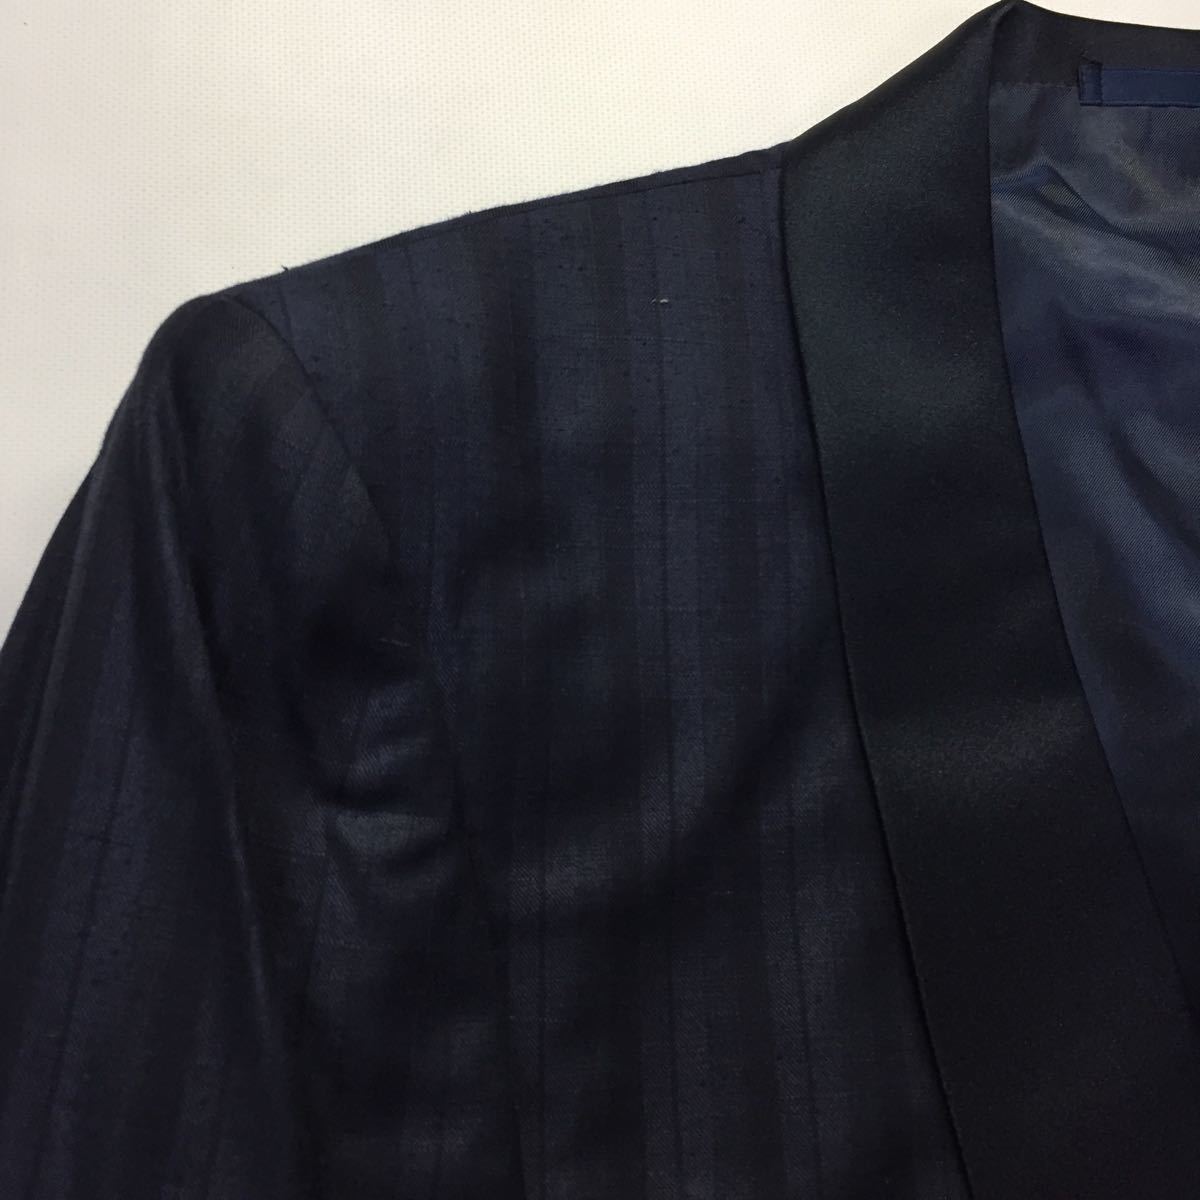  new goods super-discount tag attaching 70,000 jpy tuxedo jacket large size size A4 navy blue gradation stripe wool silk . wool 